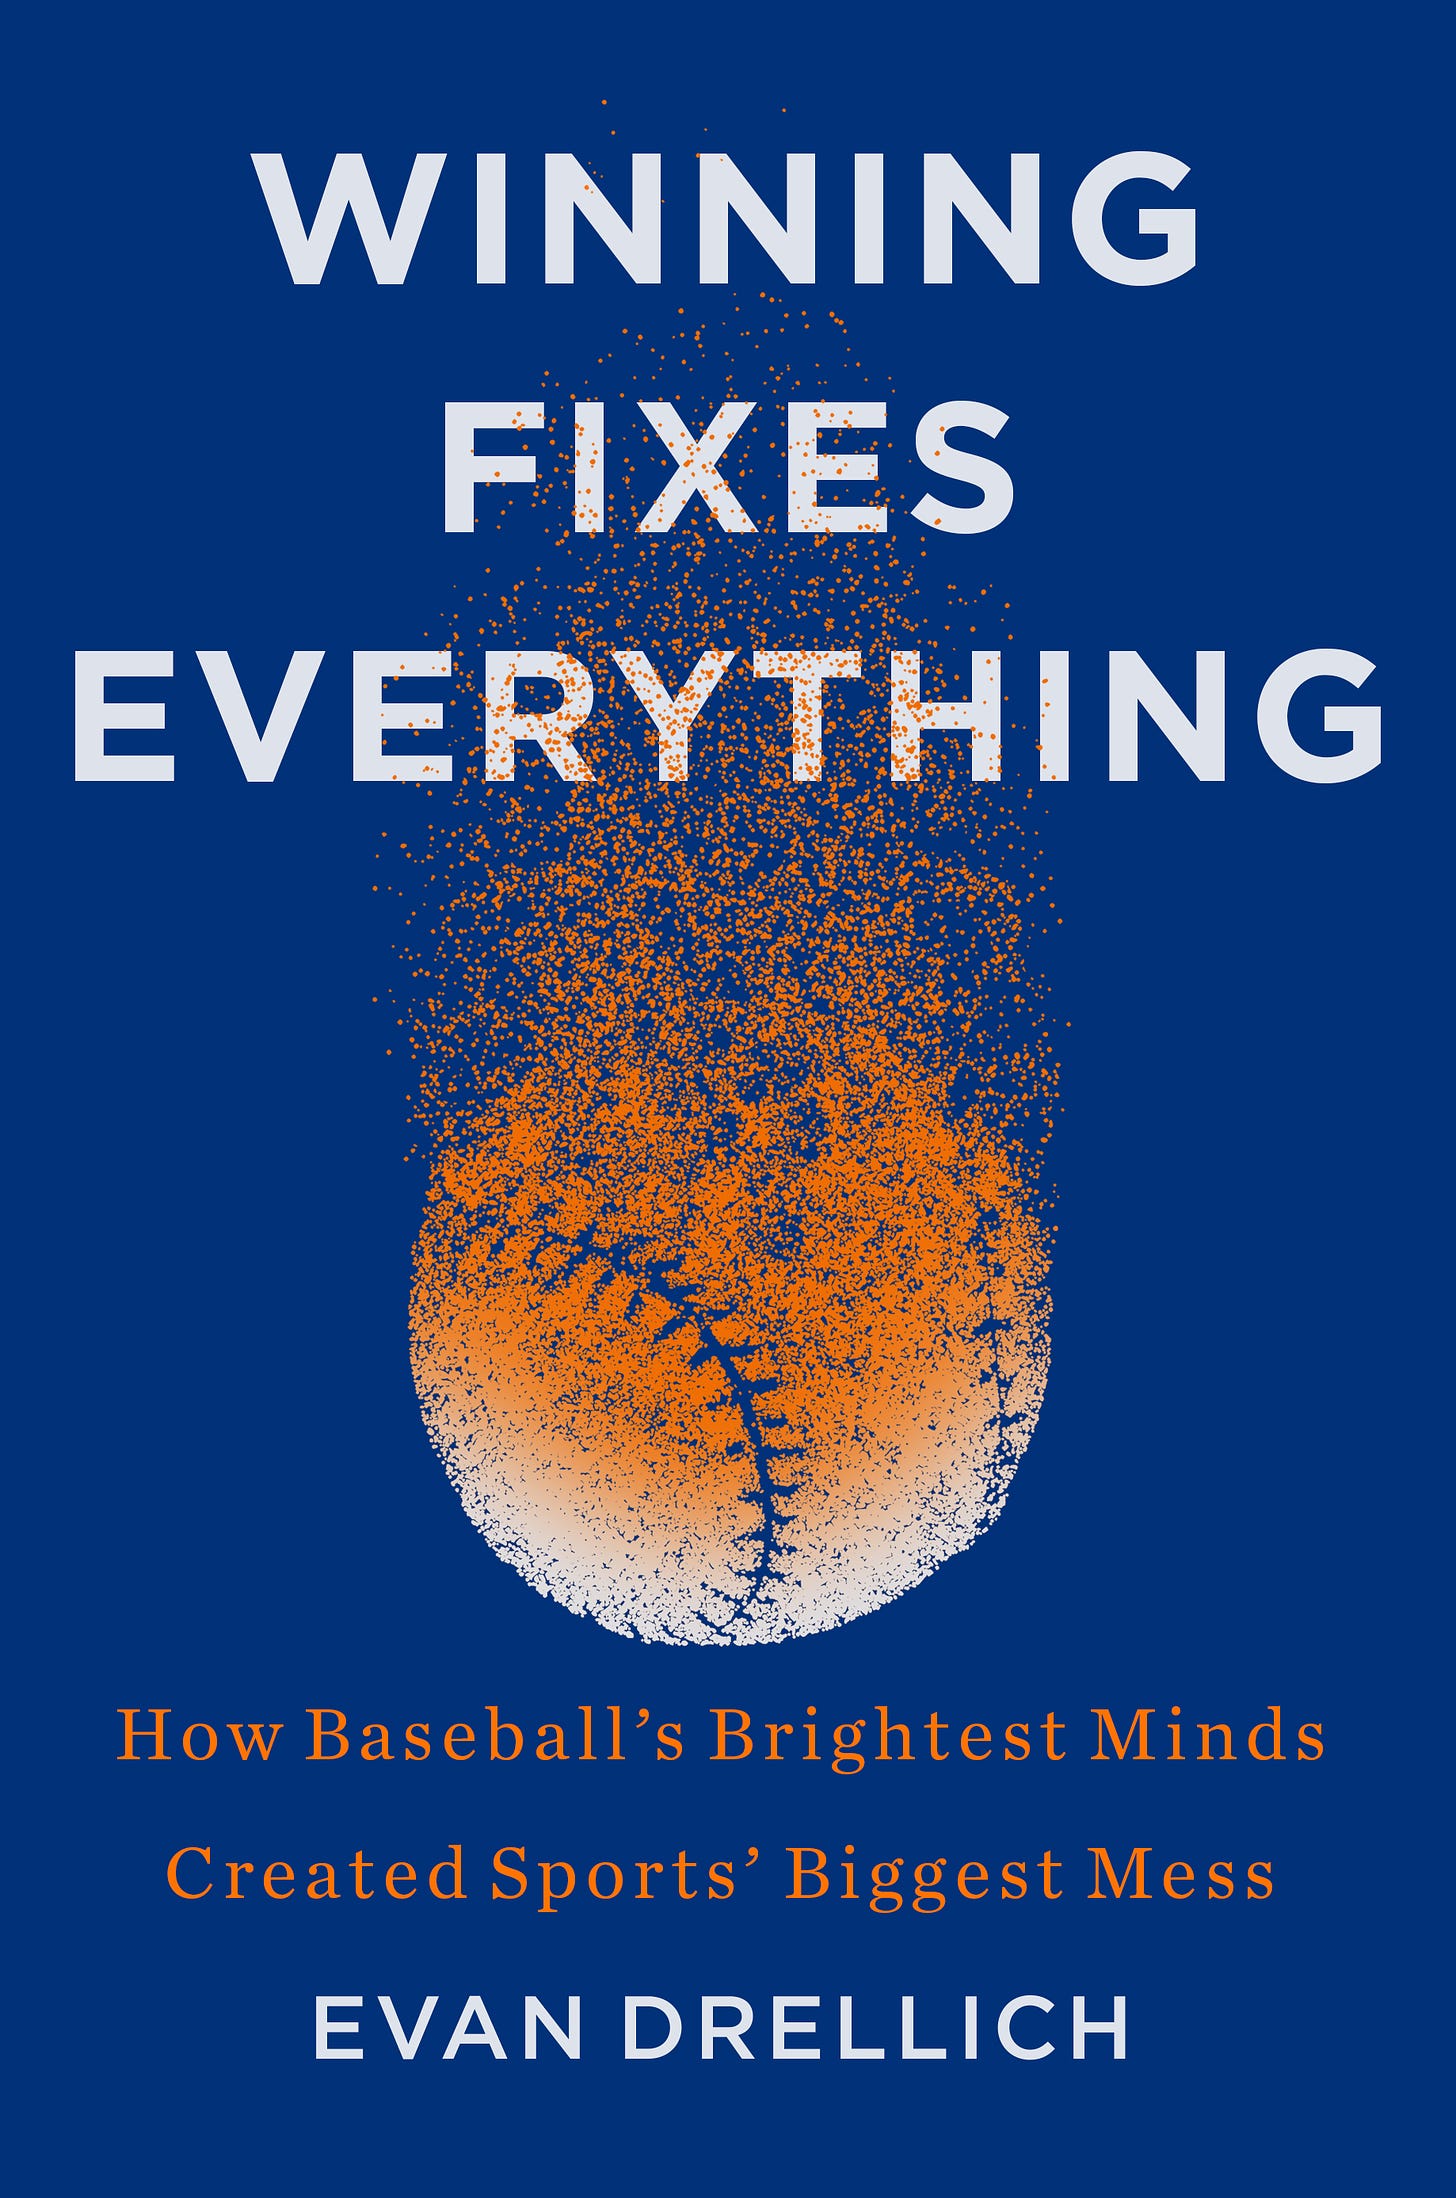 Winning Fixes Everything by Evan Drellich